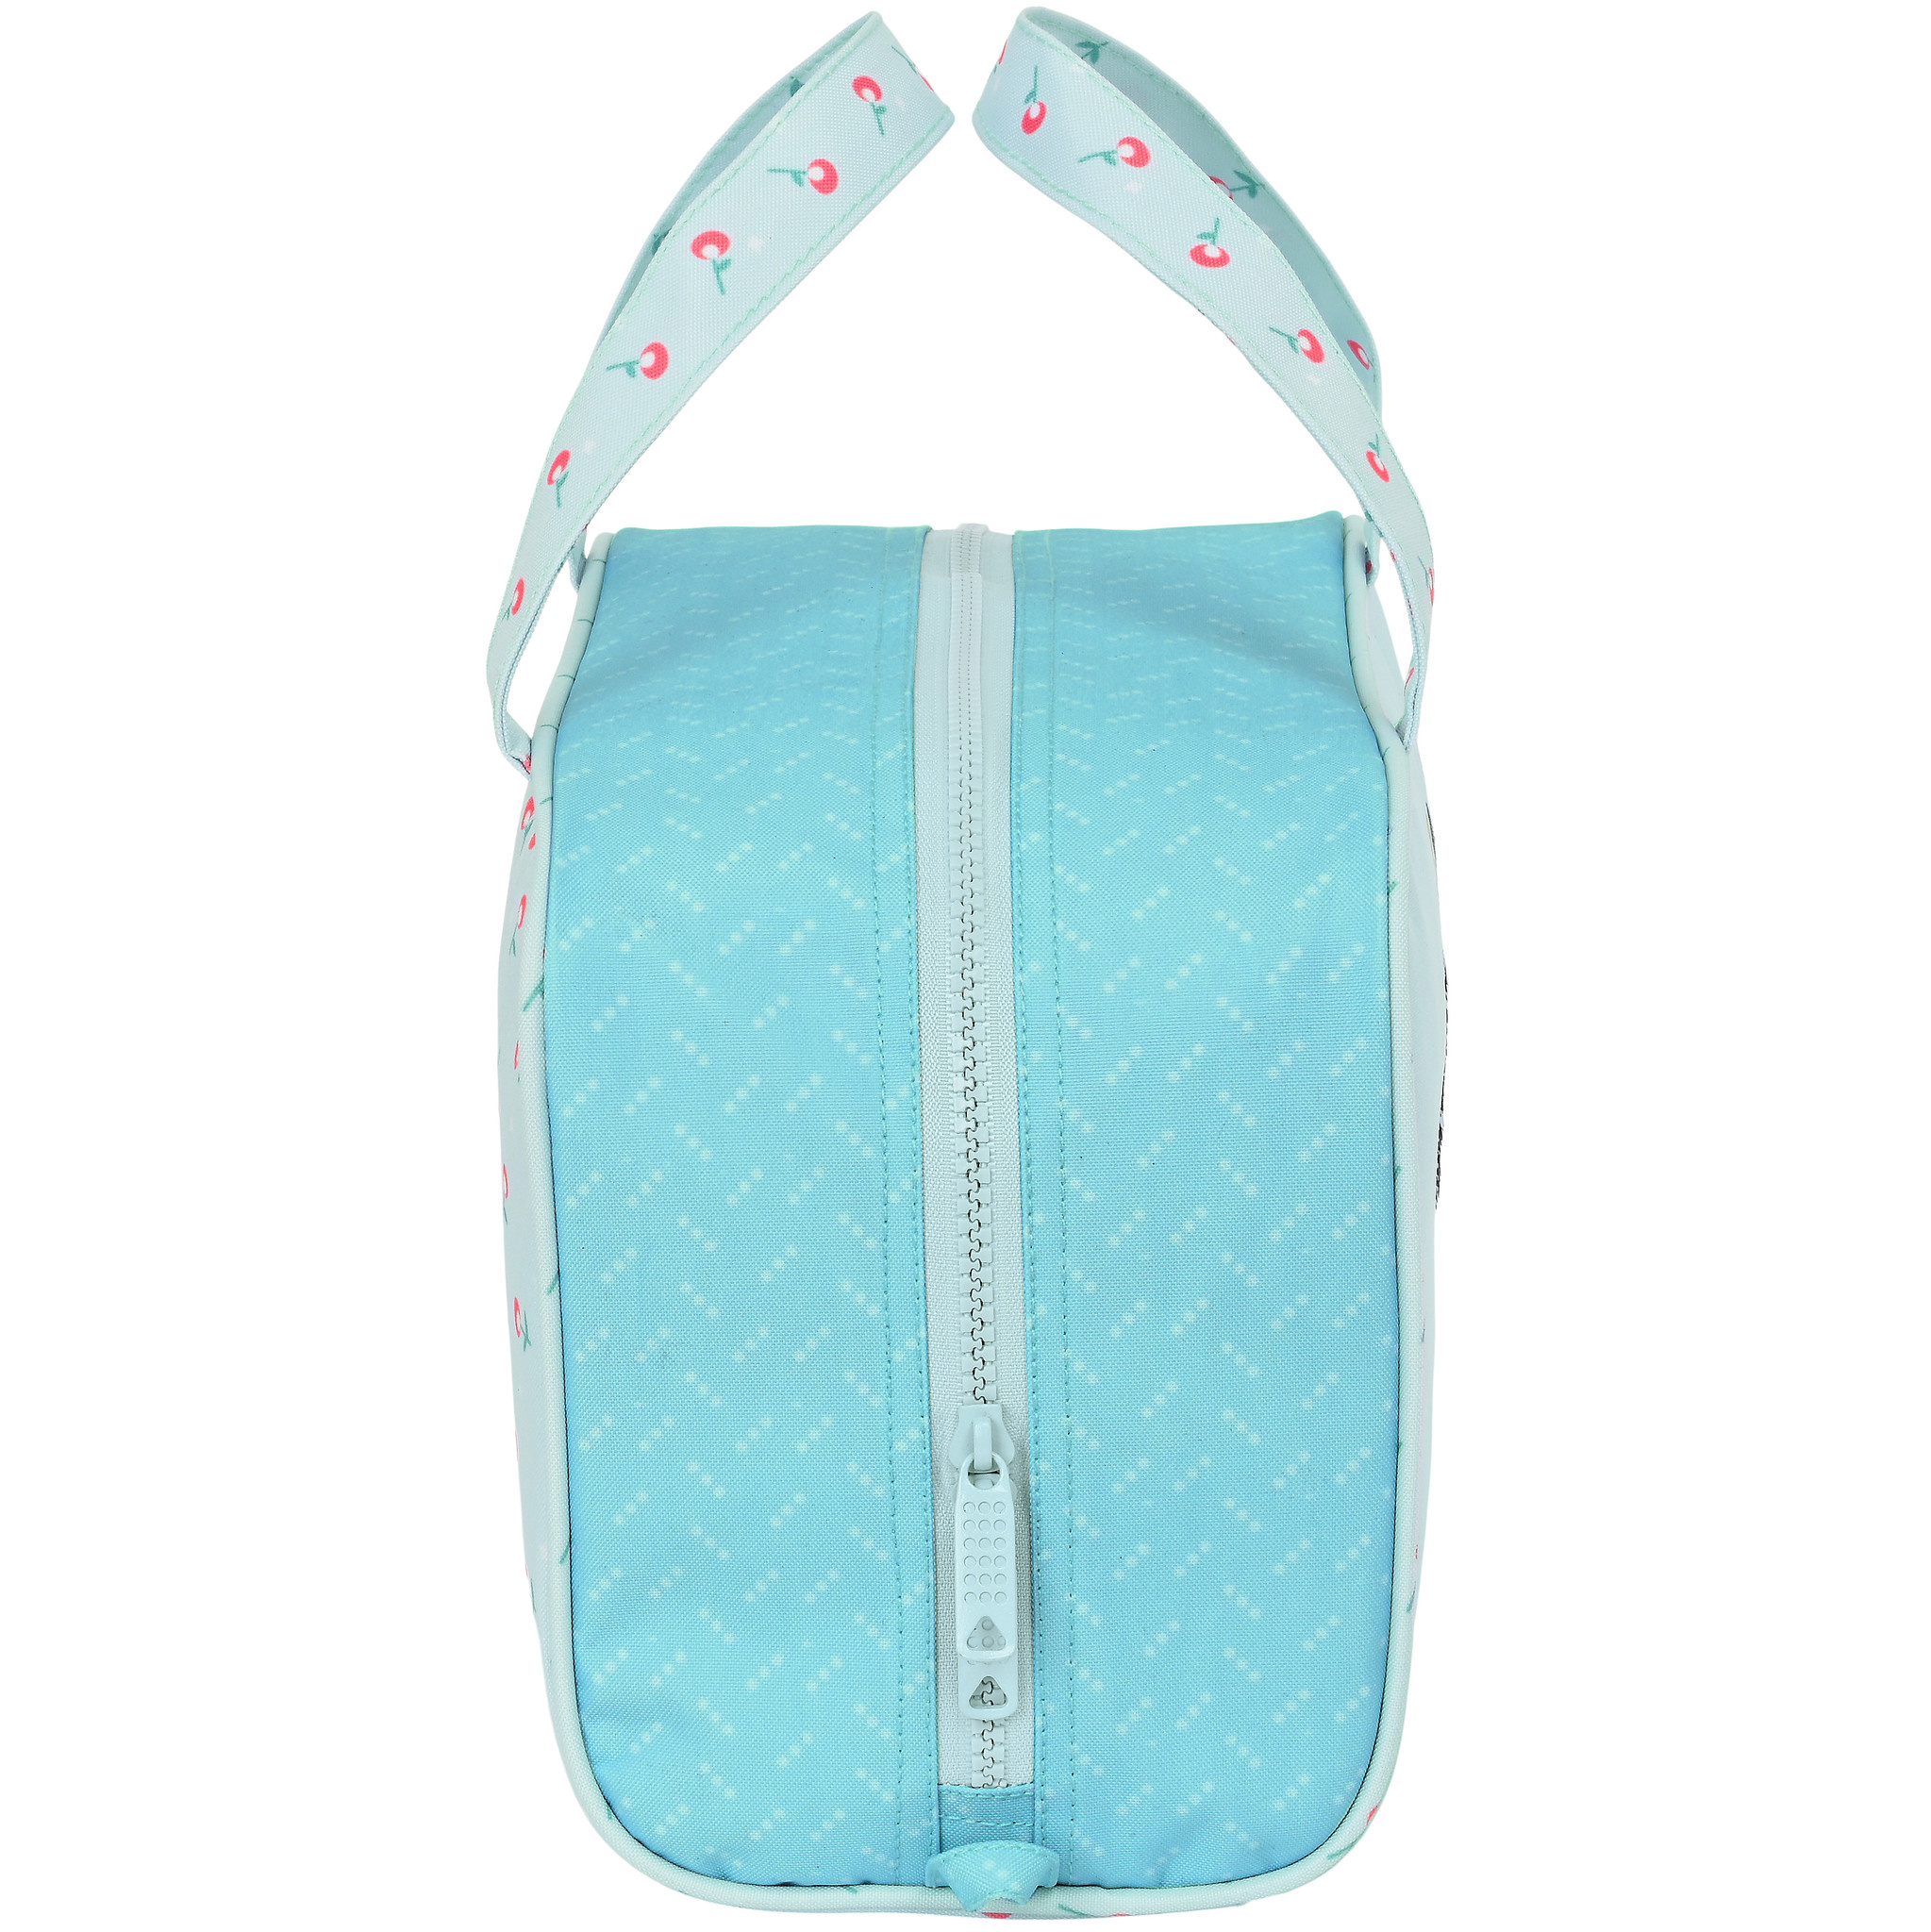 BlackFit8 Toiletry bag Butterfly - 31 x 19 x 14 cm - Polyester